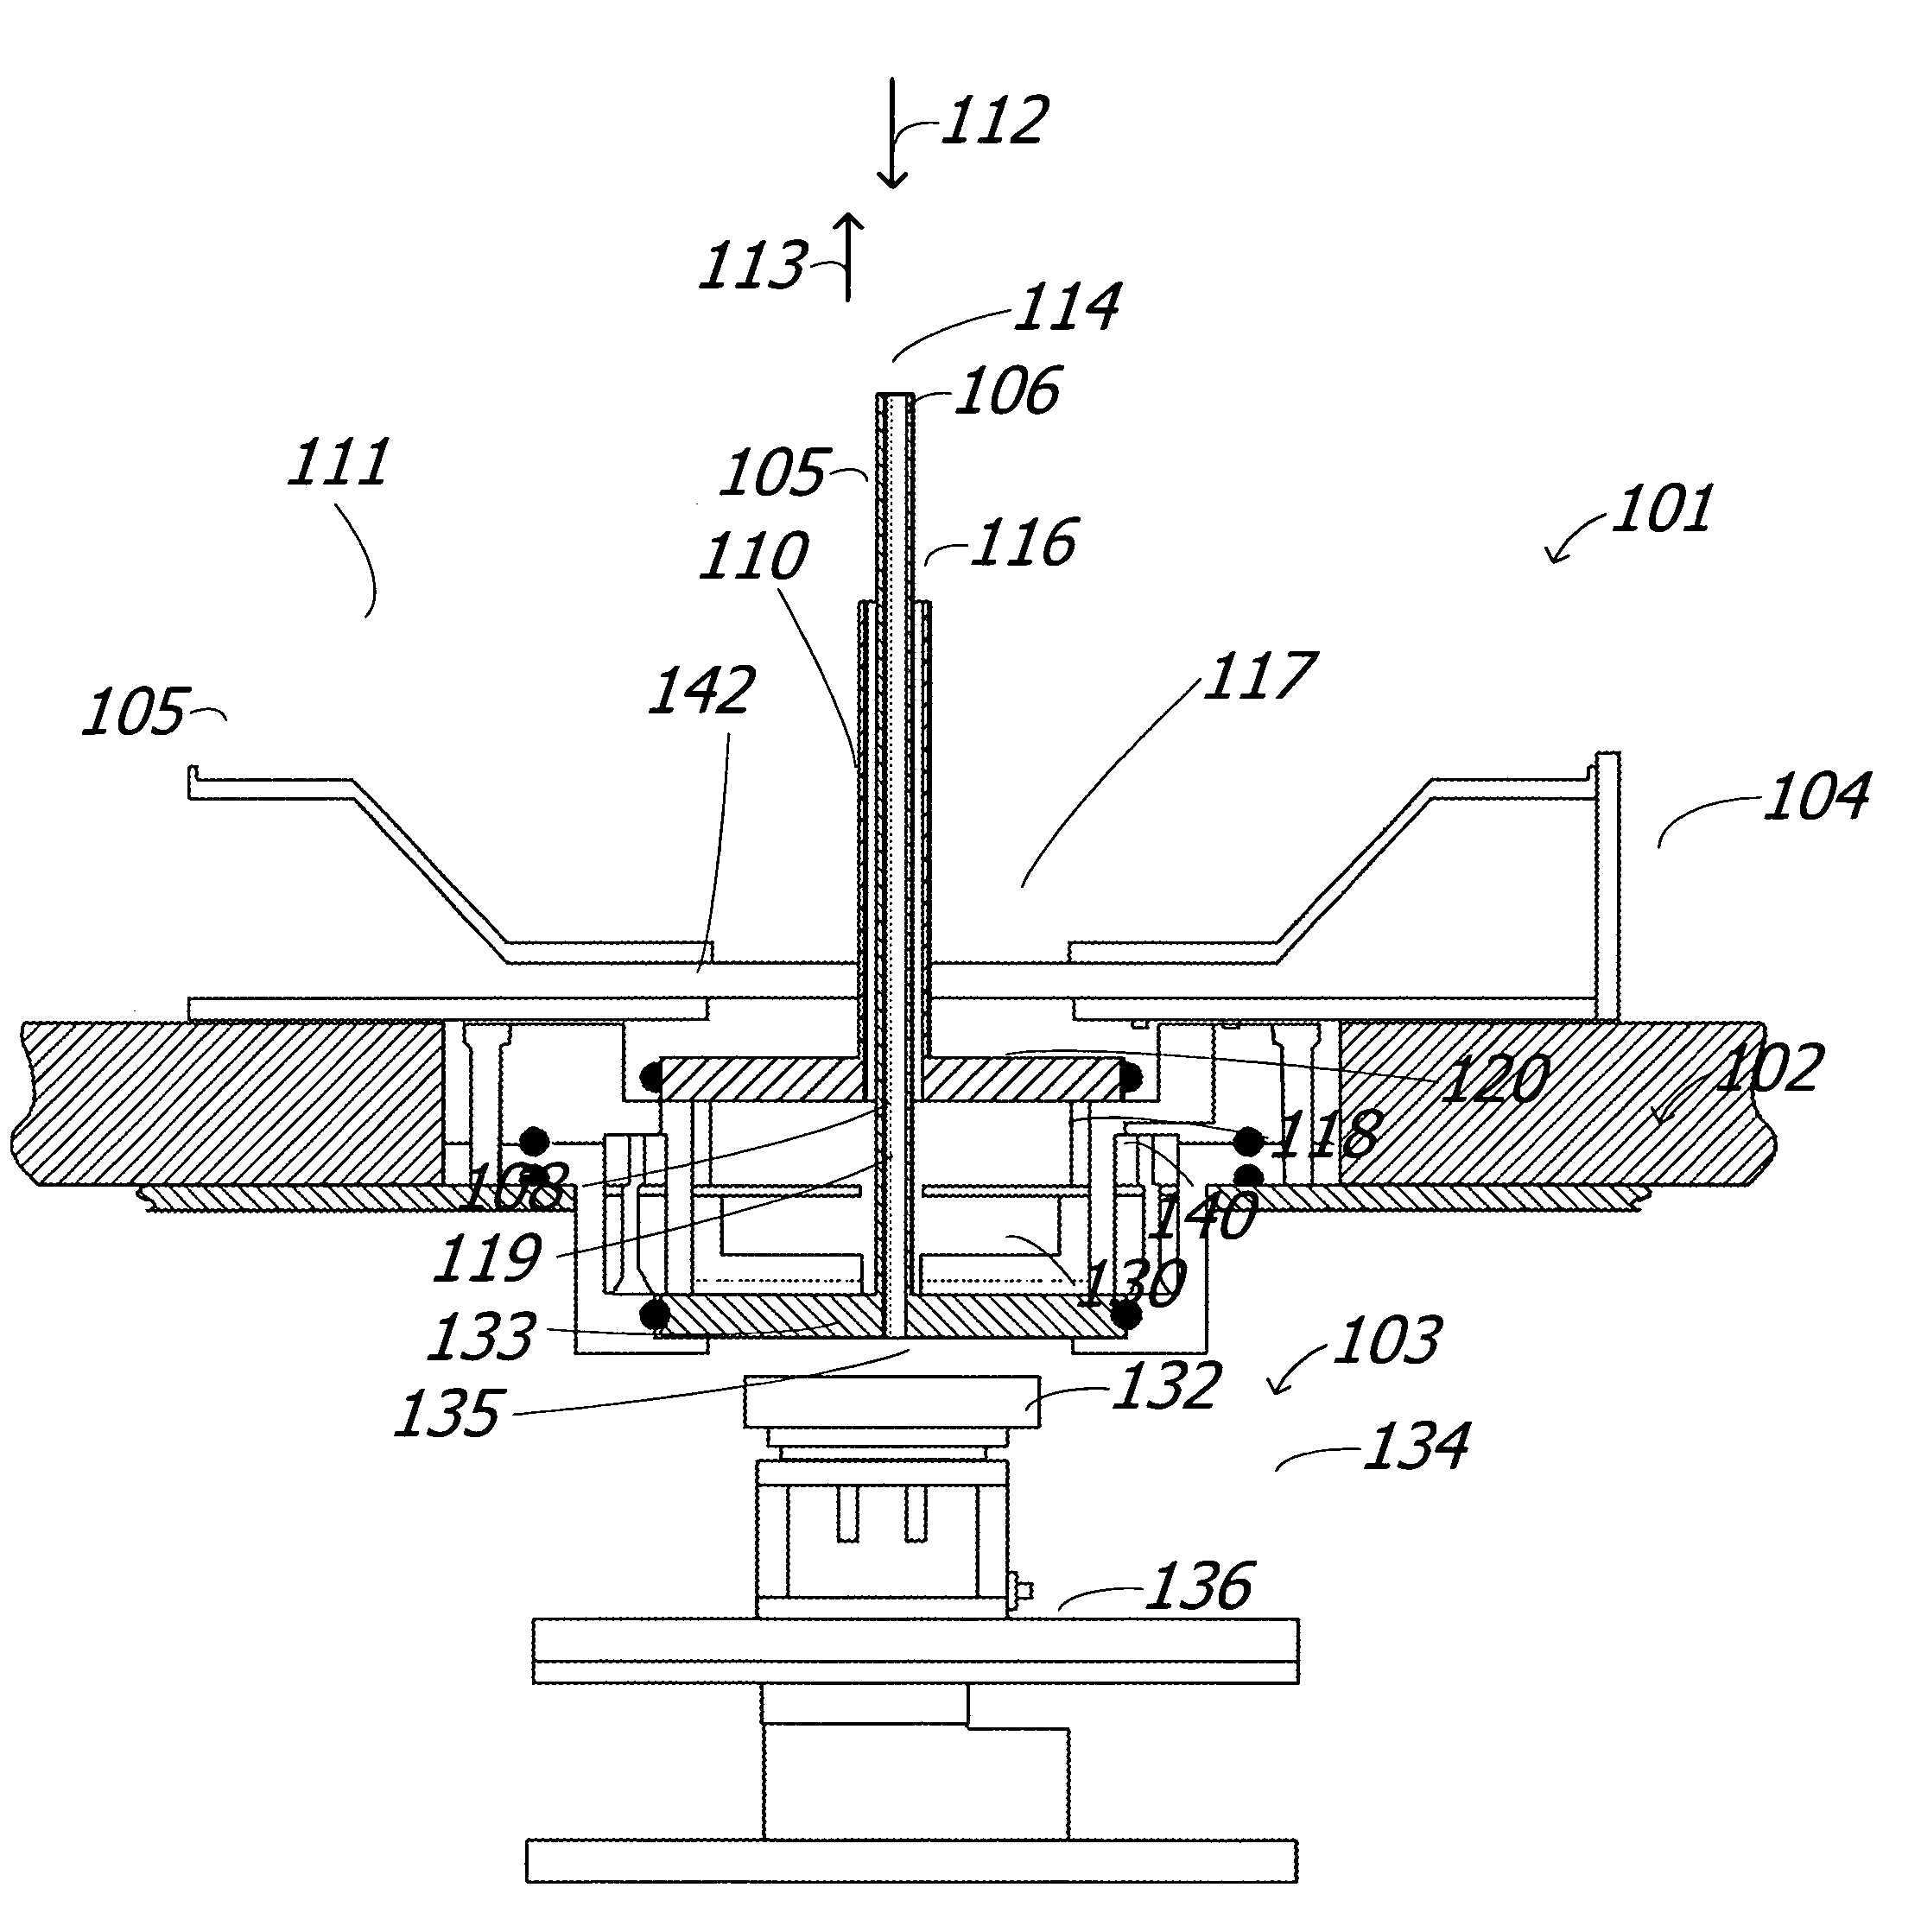 Medium pressure plasma system for removal of surface layers without substrate loss